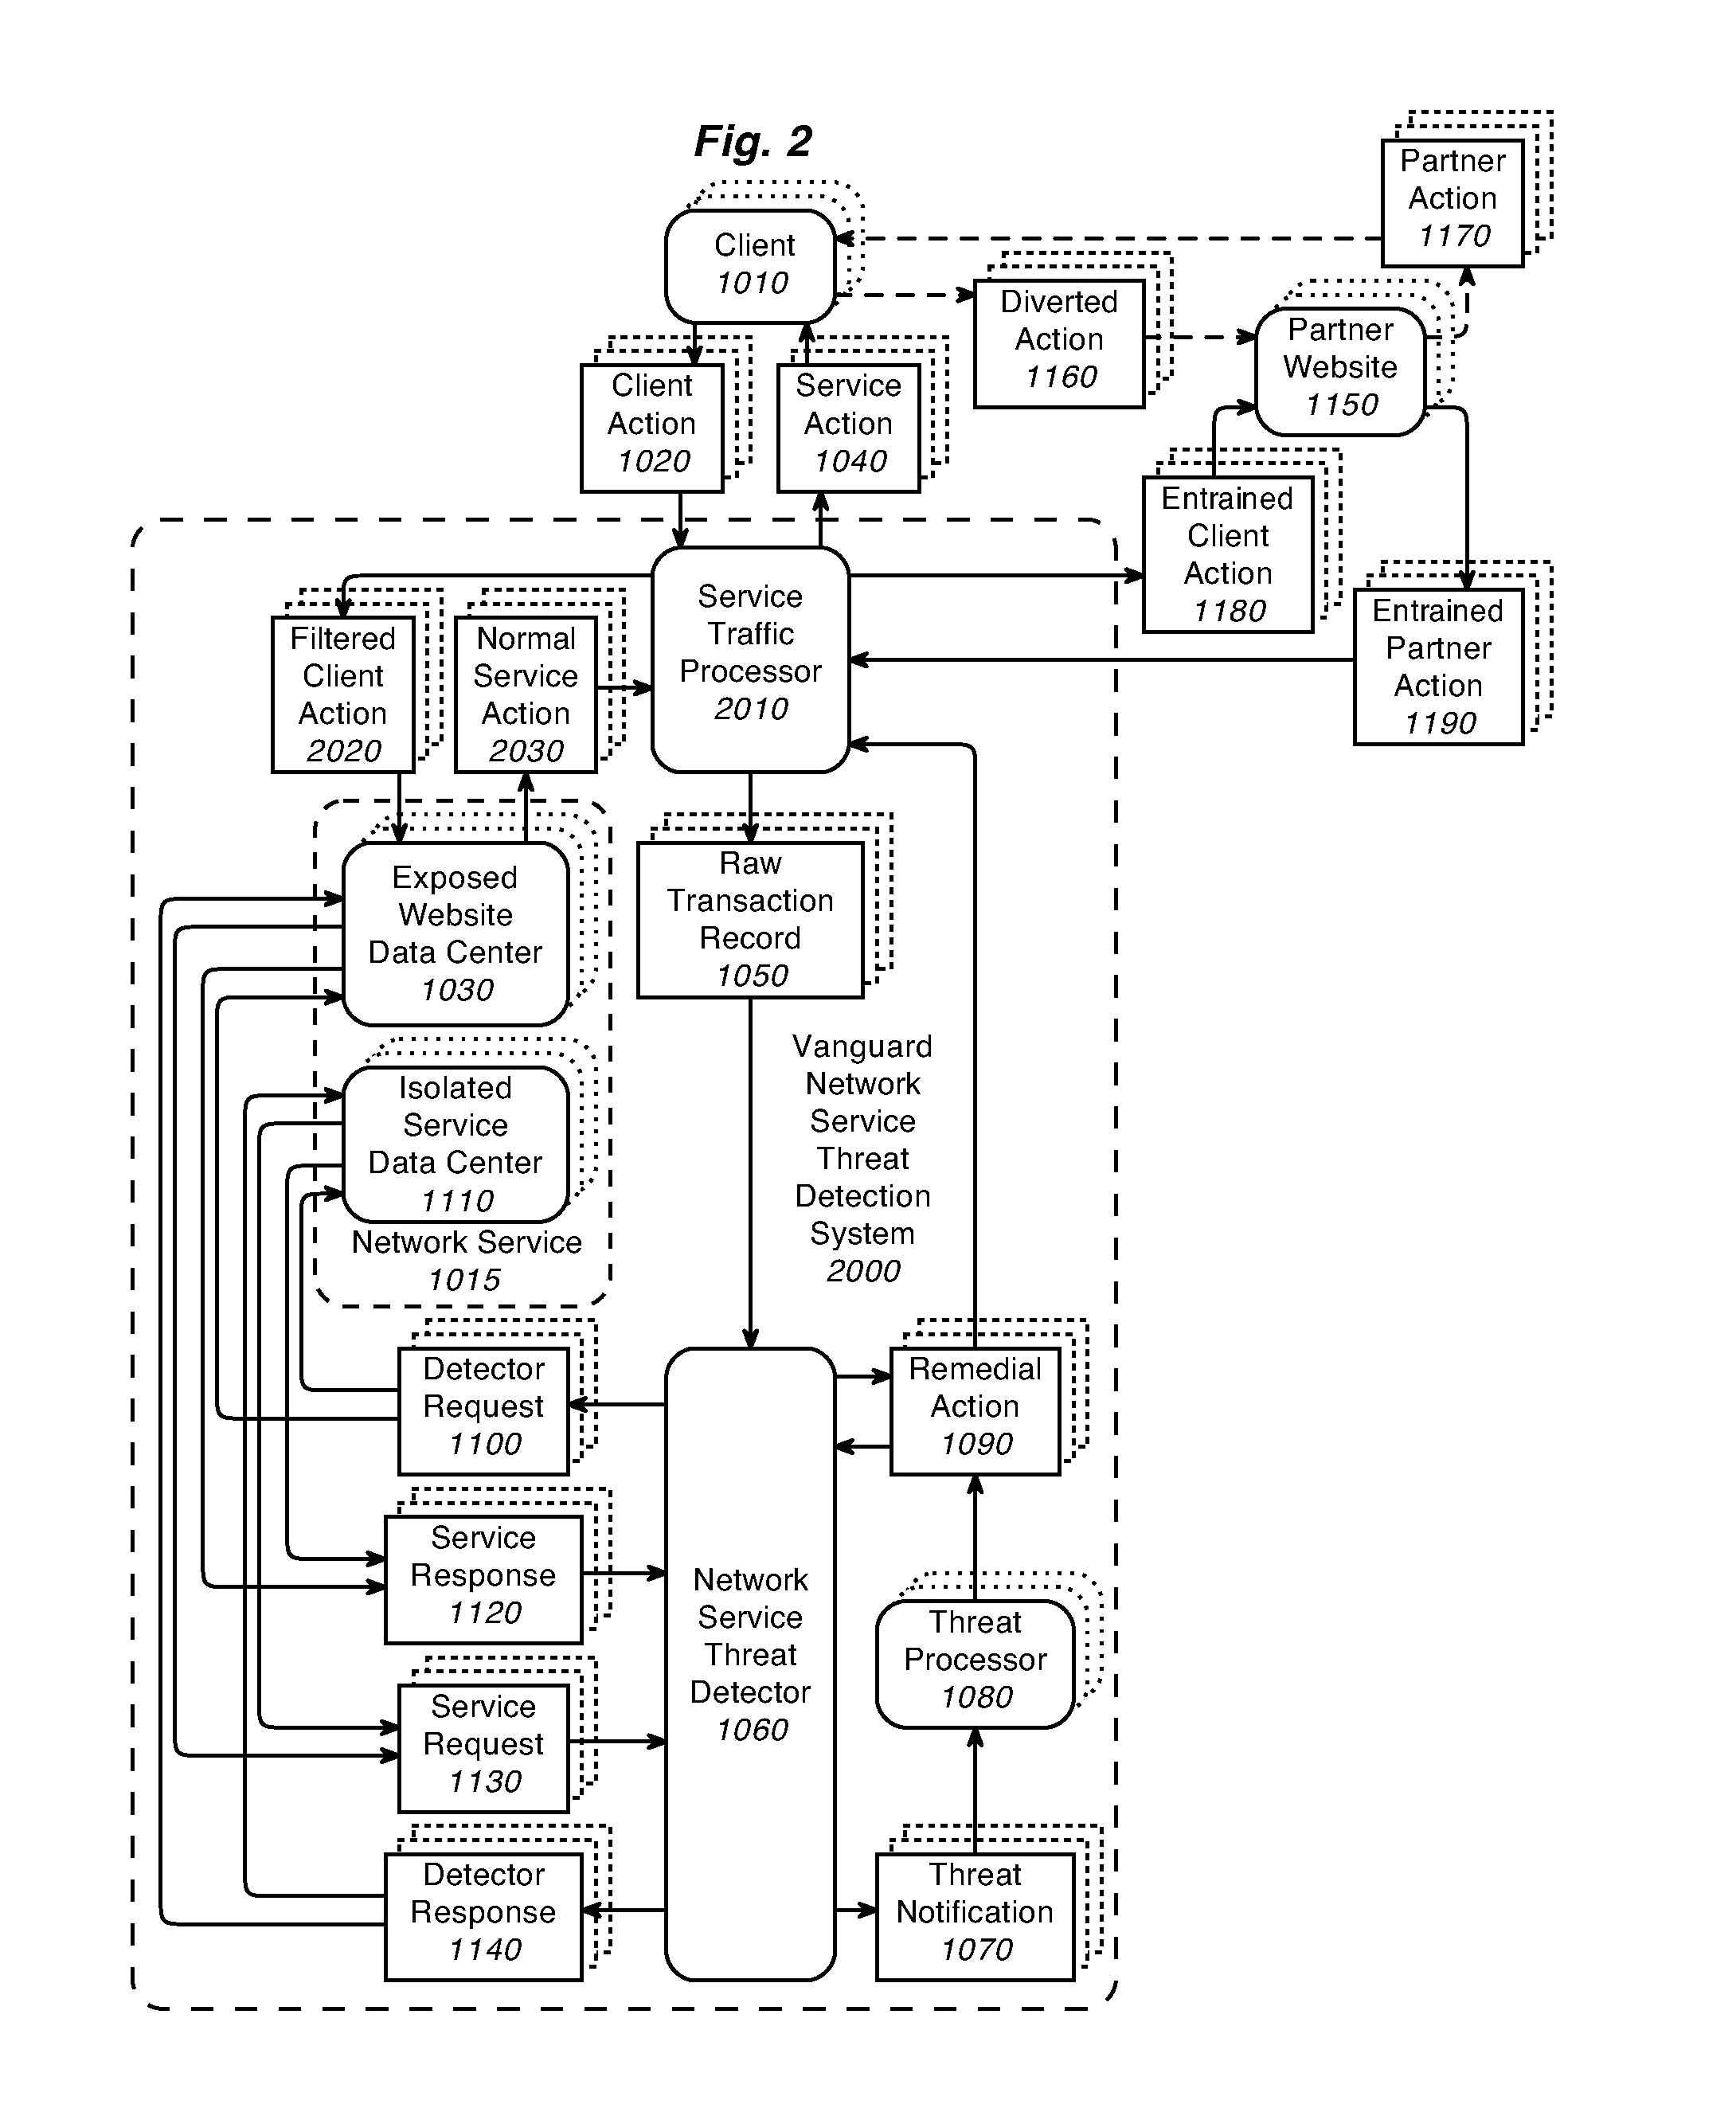 System and method for network security including detection of attacks through partner websites